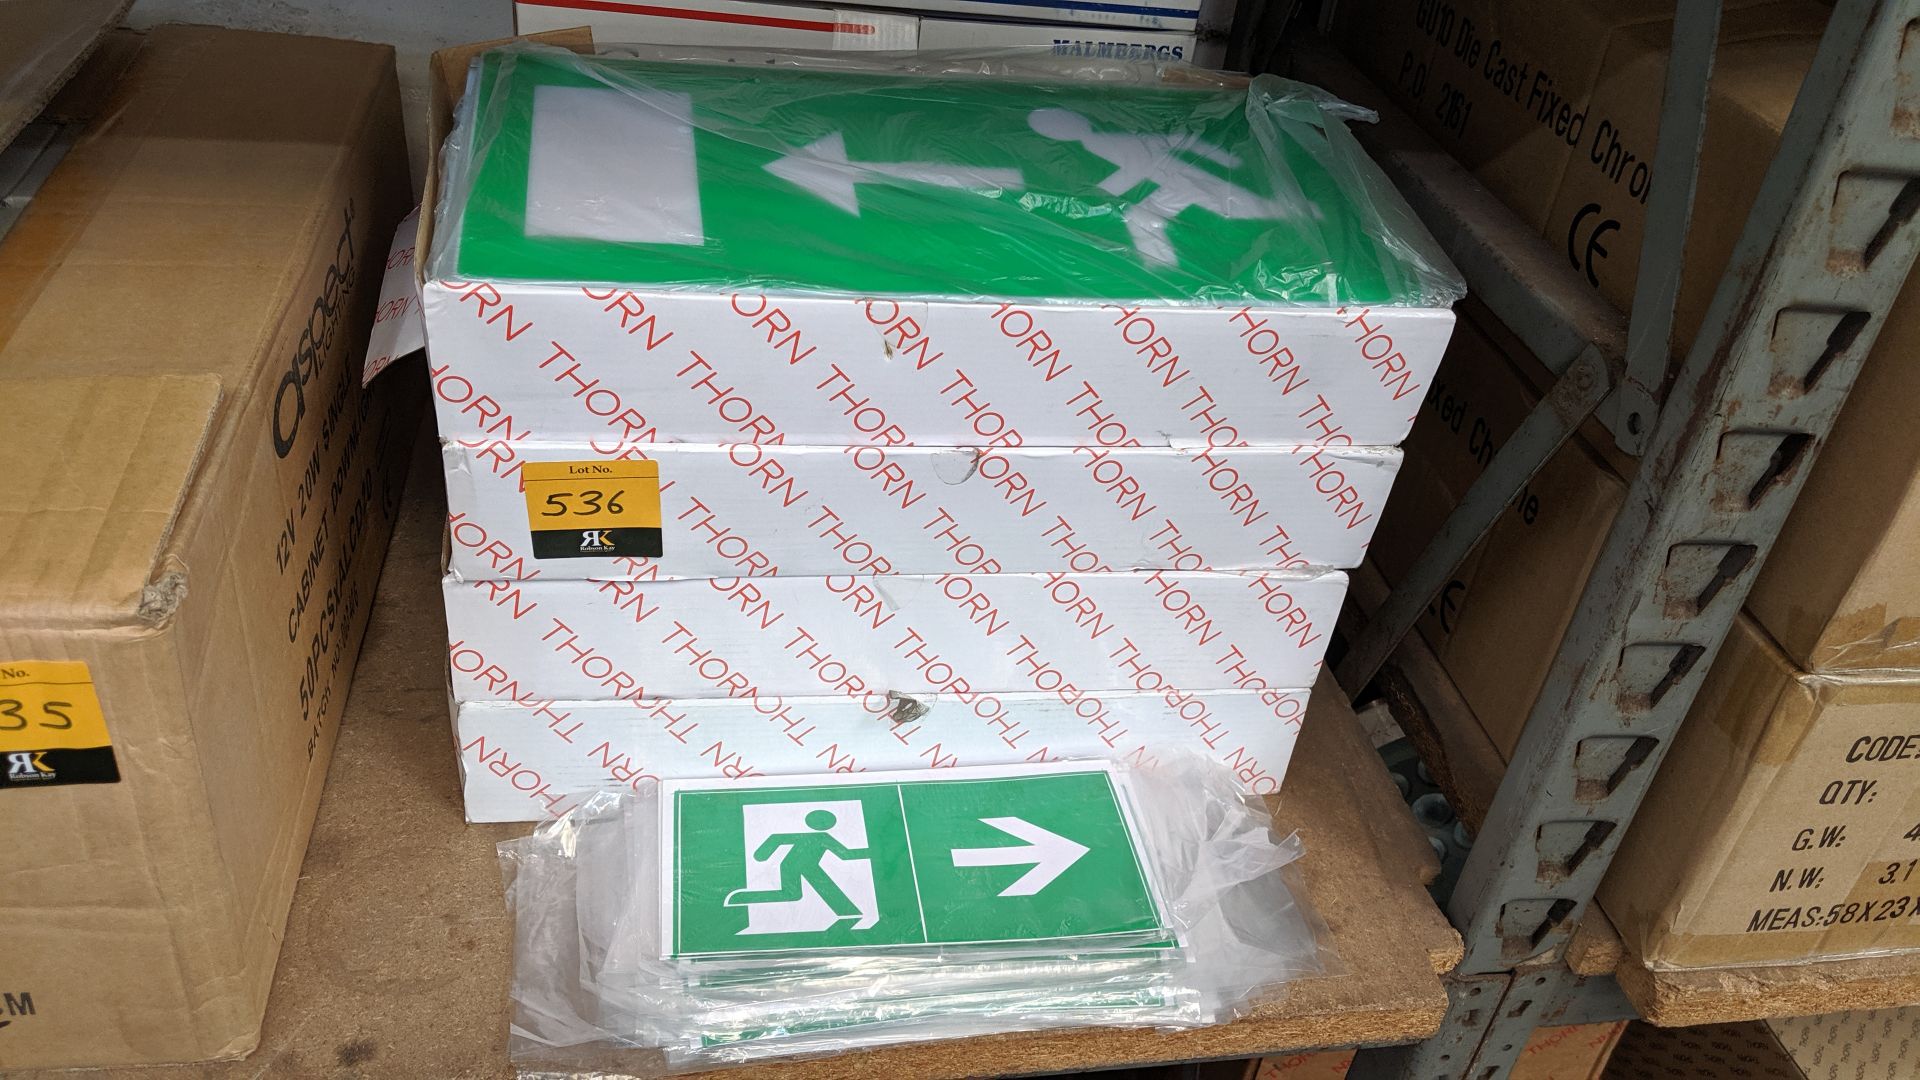 4 off Thorn Emergency Exit lighting units plus quantity of Emergency Lighting stickers. This is